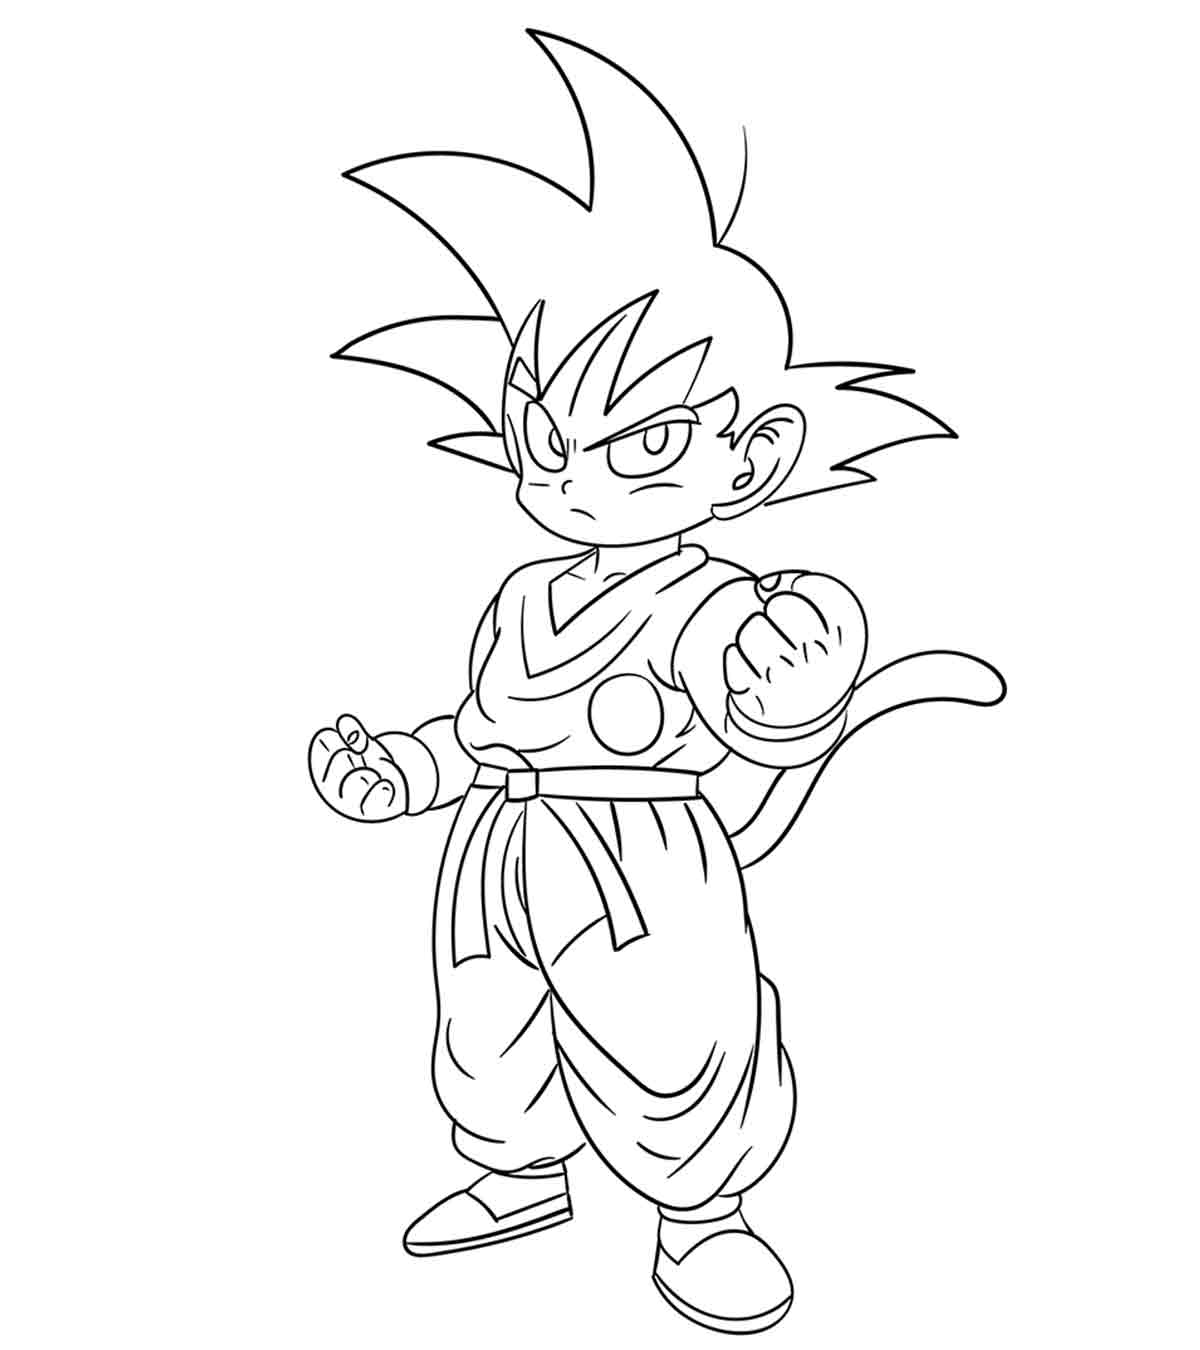 Top 20 Free Printable Dragon Ball Z Coloring Pages Online ...